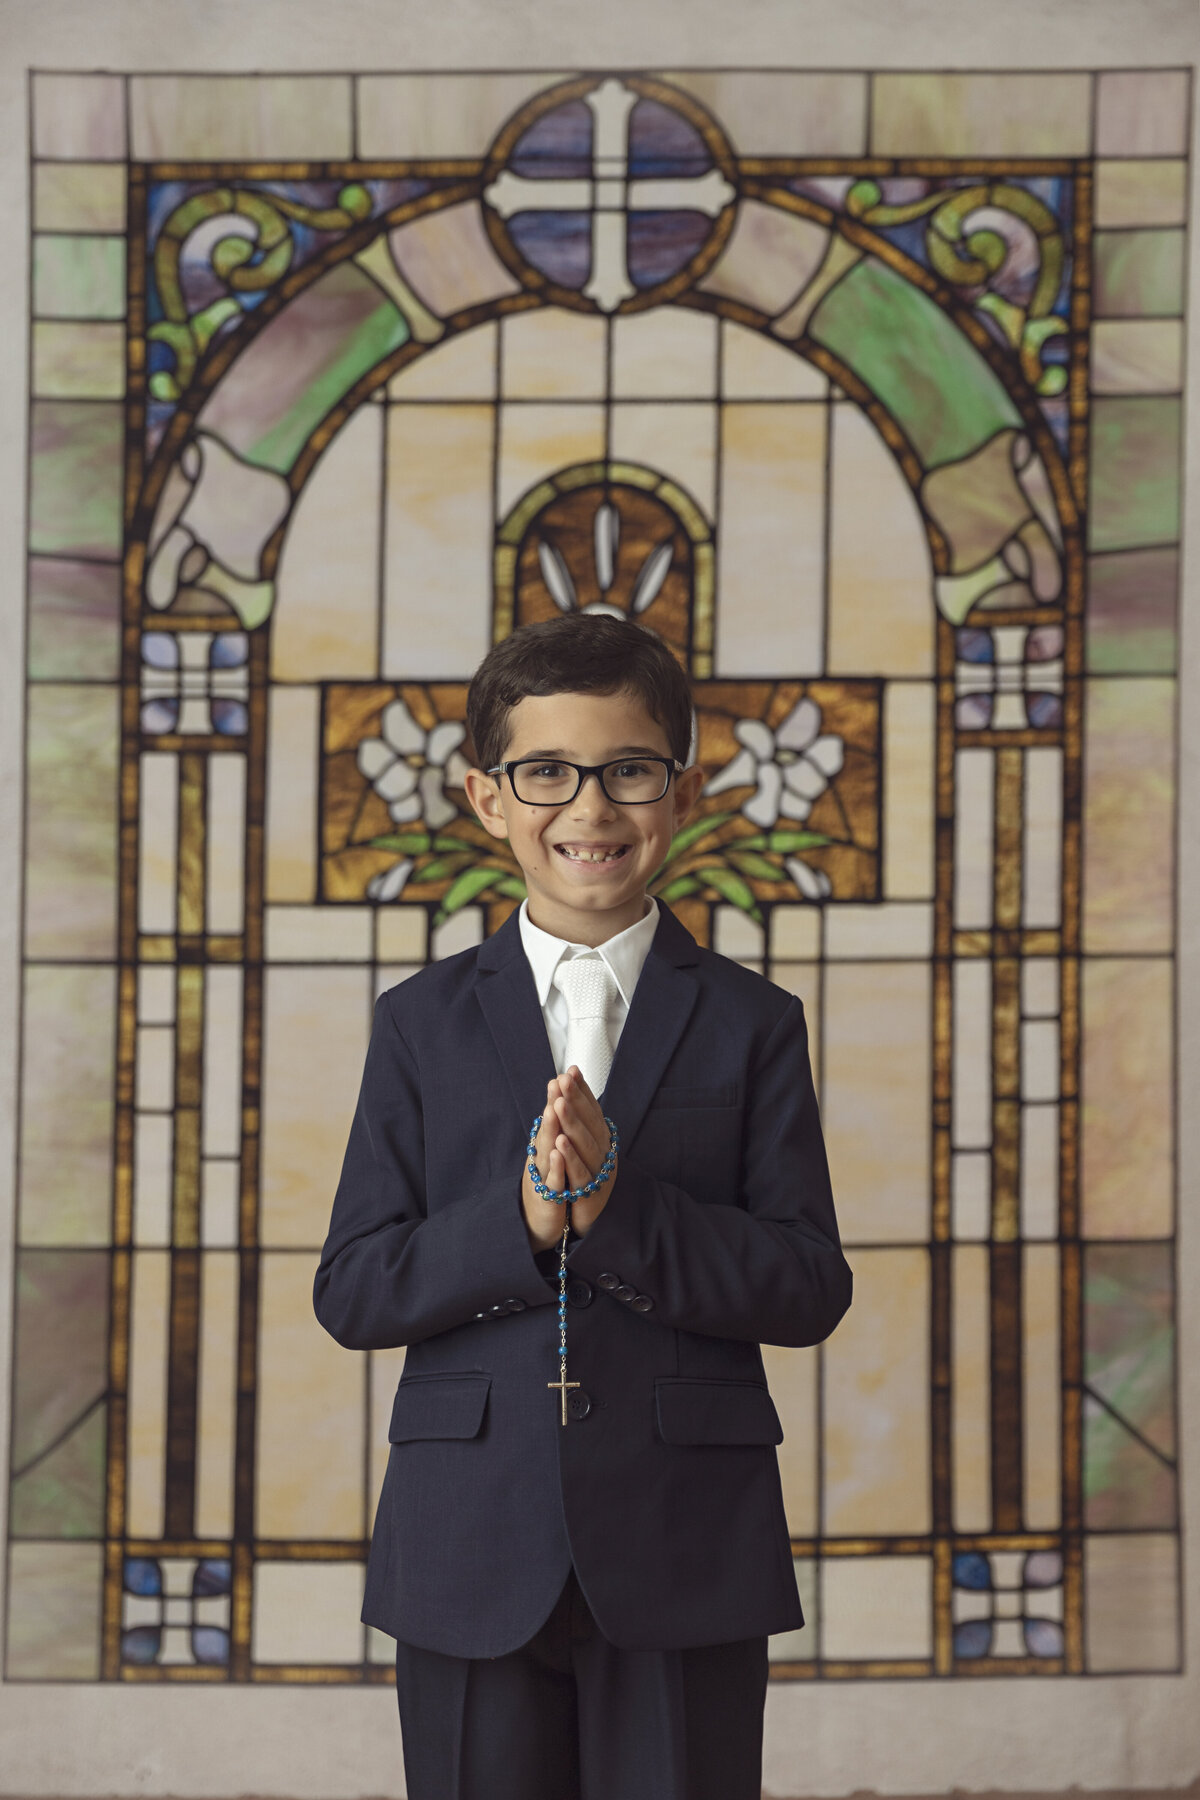 A young boy stands in front of a stained glass window praying with rosary beads in a black suit